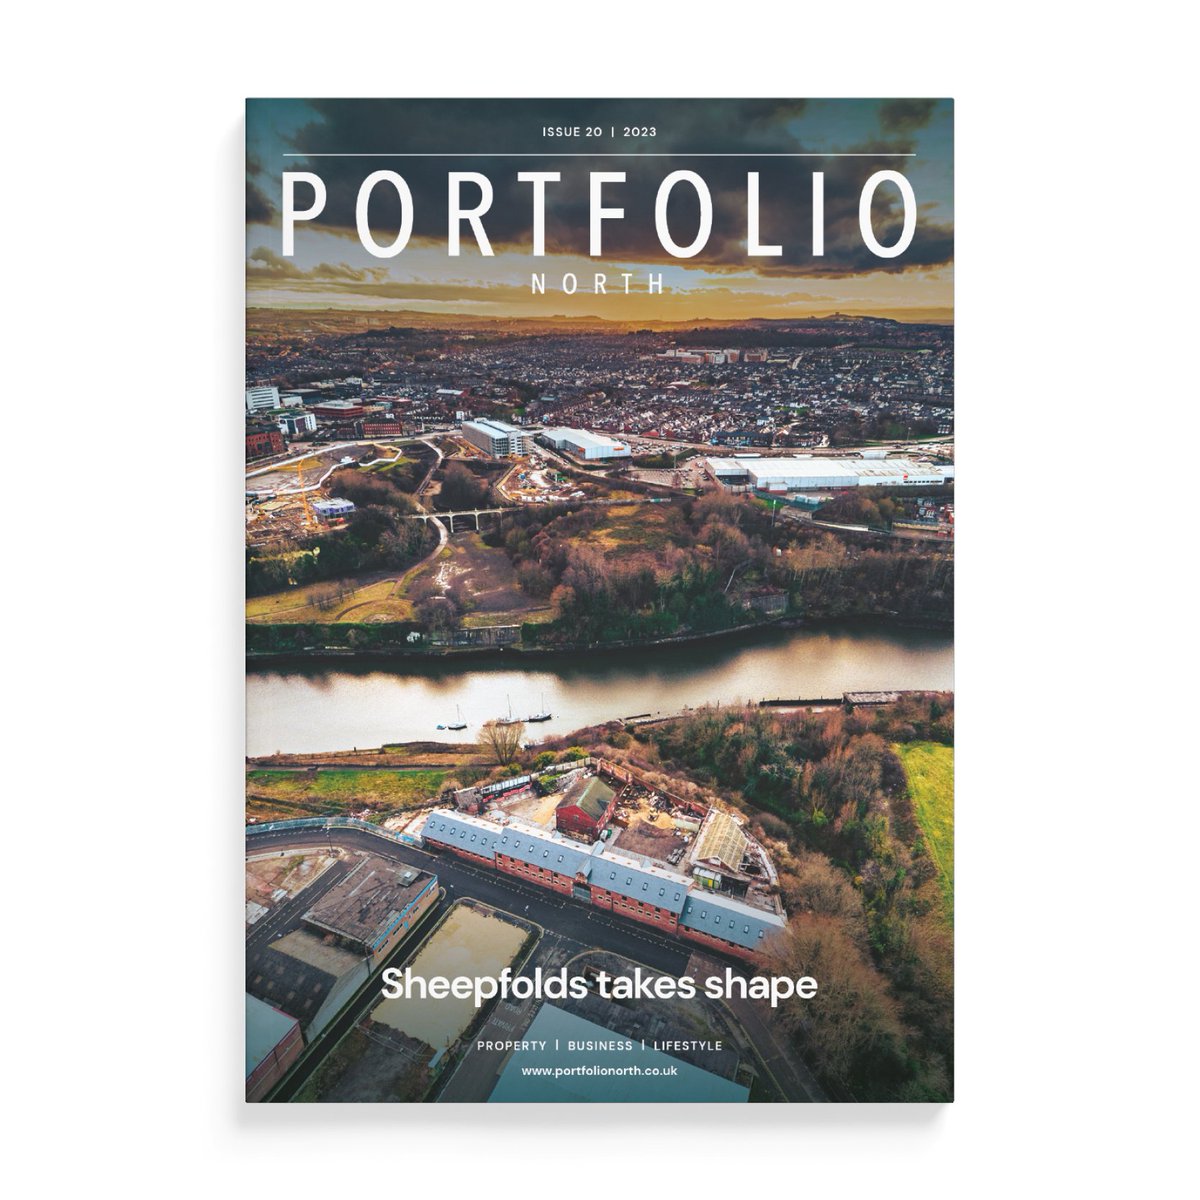 The first exclusive look at the Portfolio North issue 20 front cover featuring Sheepfolds, Sunderland. Subscribe to our e-newsletter to be first to receive a digital copy of the magazine next week: portfolionorth.co.uk/sign-up/ #portfolionorth #newcastle #magazine #business